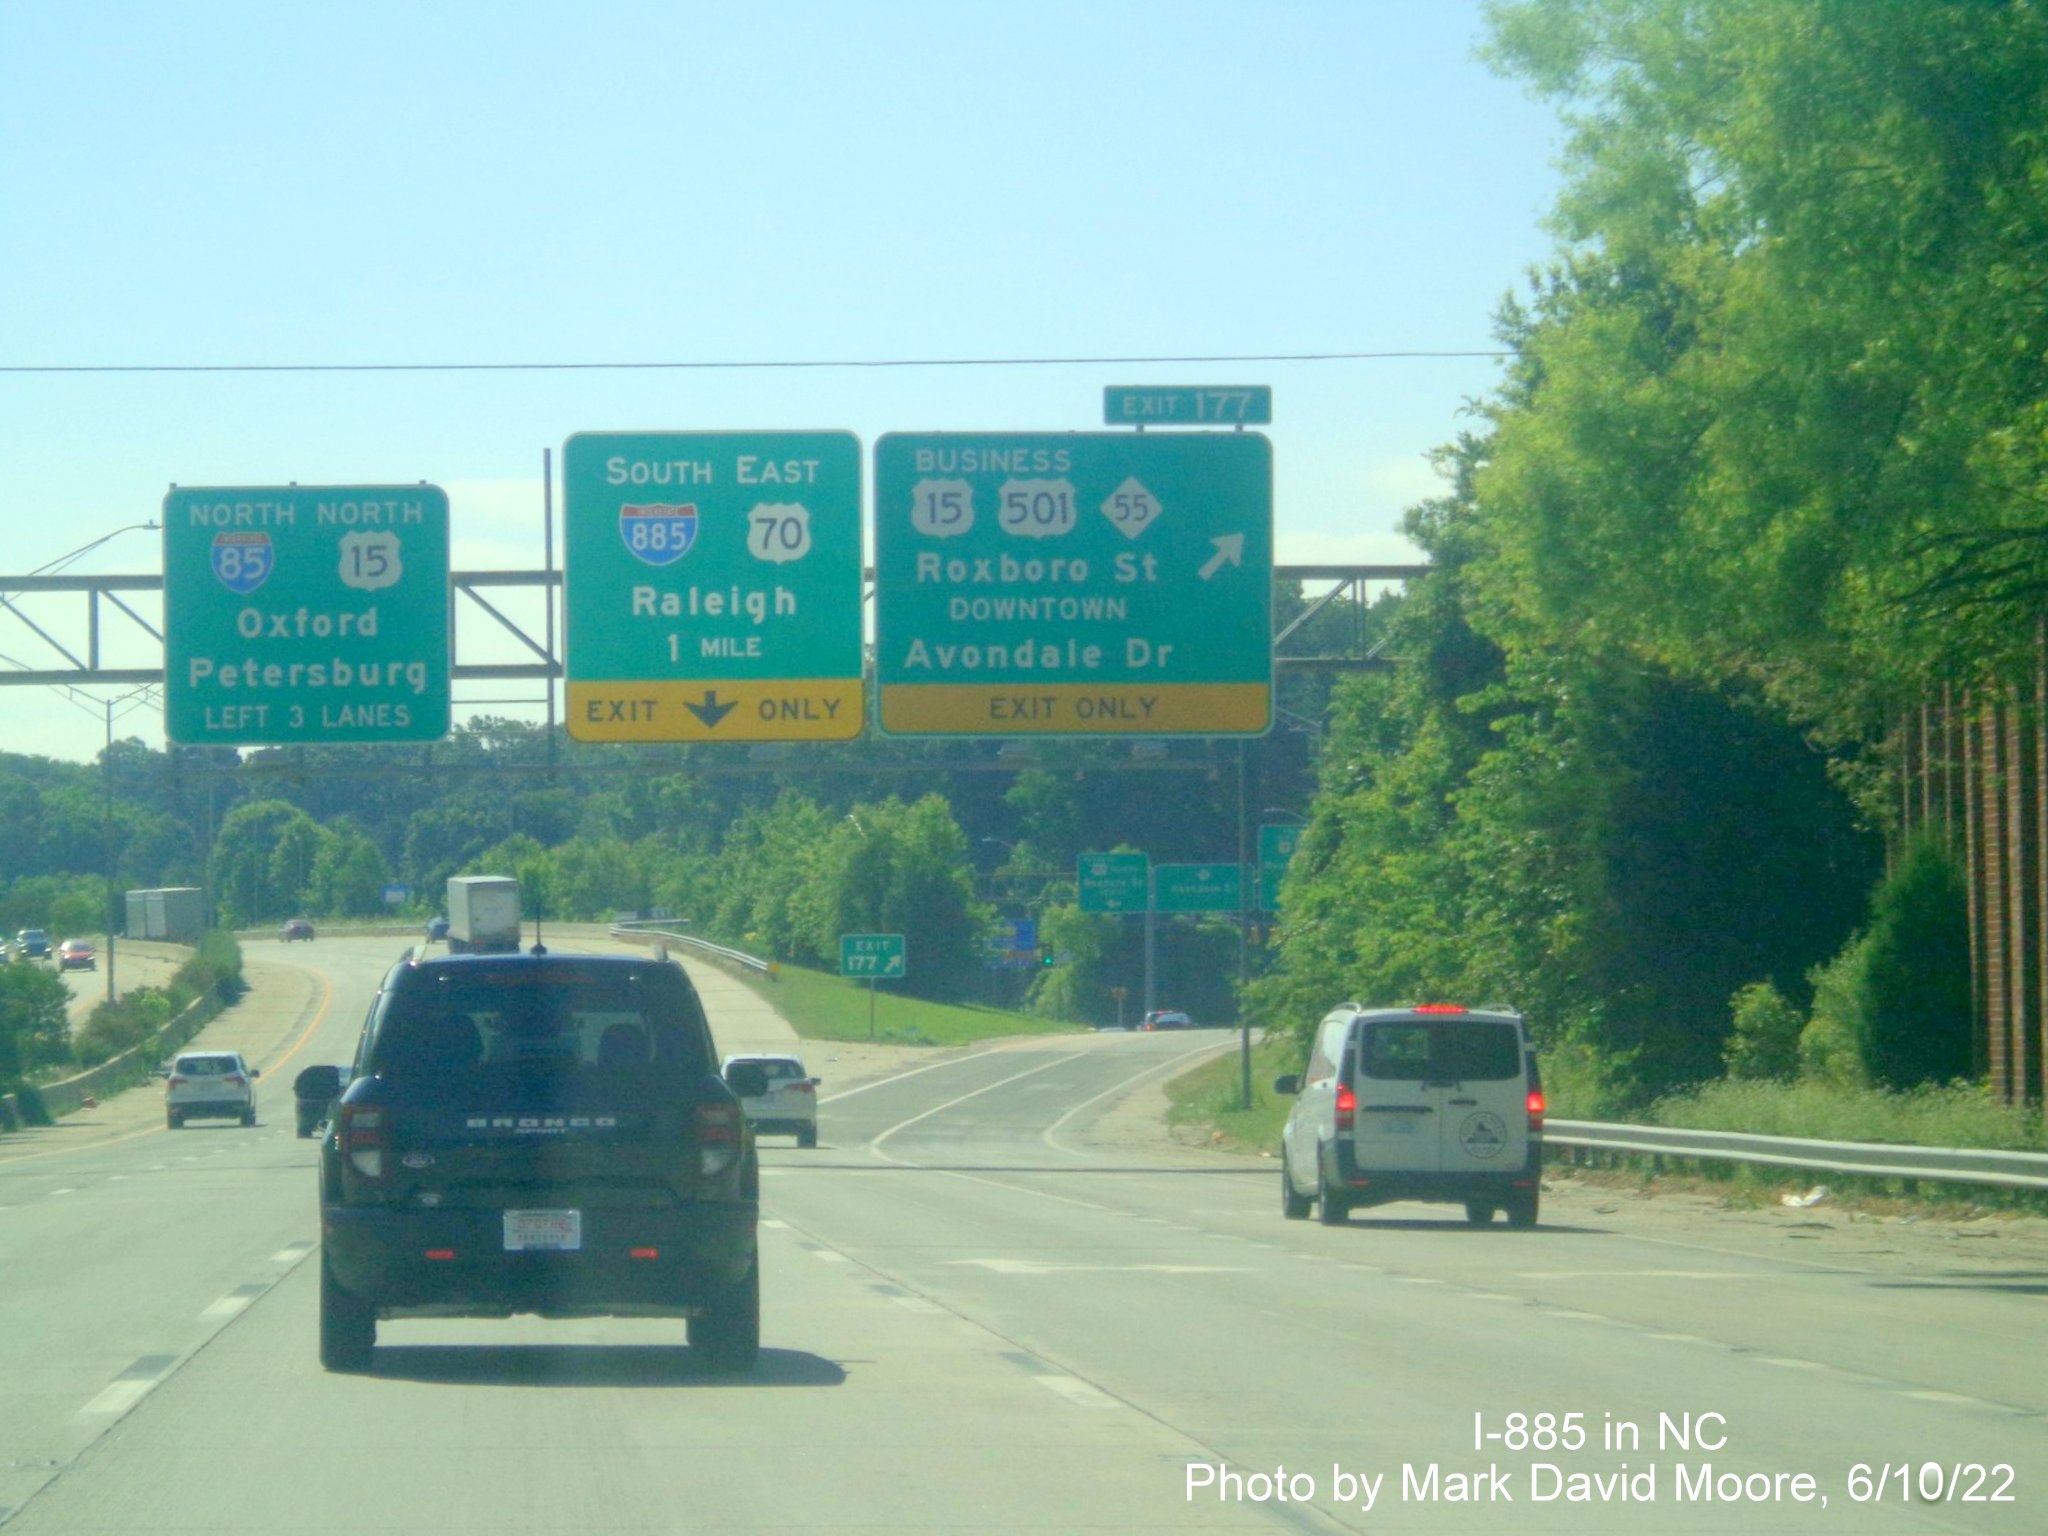 Image of 1 mile a advance overhead sign for new I-885 South/US 70 East exit
        on I-85 North/US 70 East in Durham, by Mark David Moore June 2022